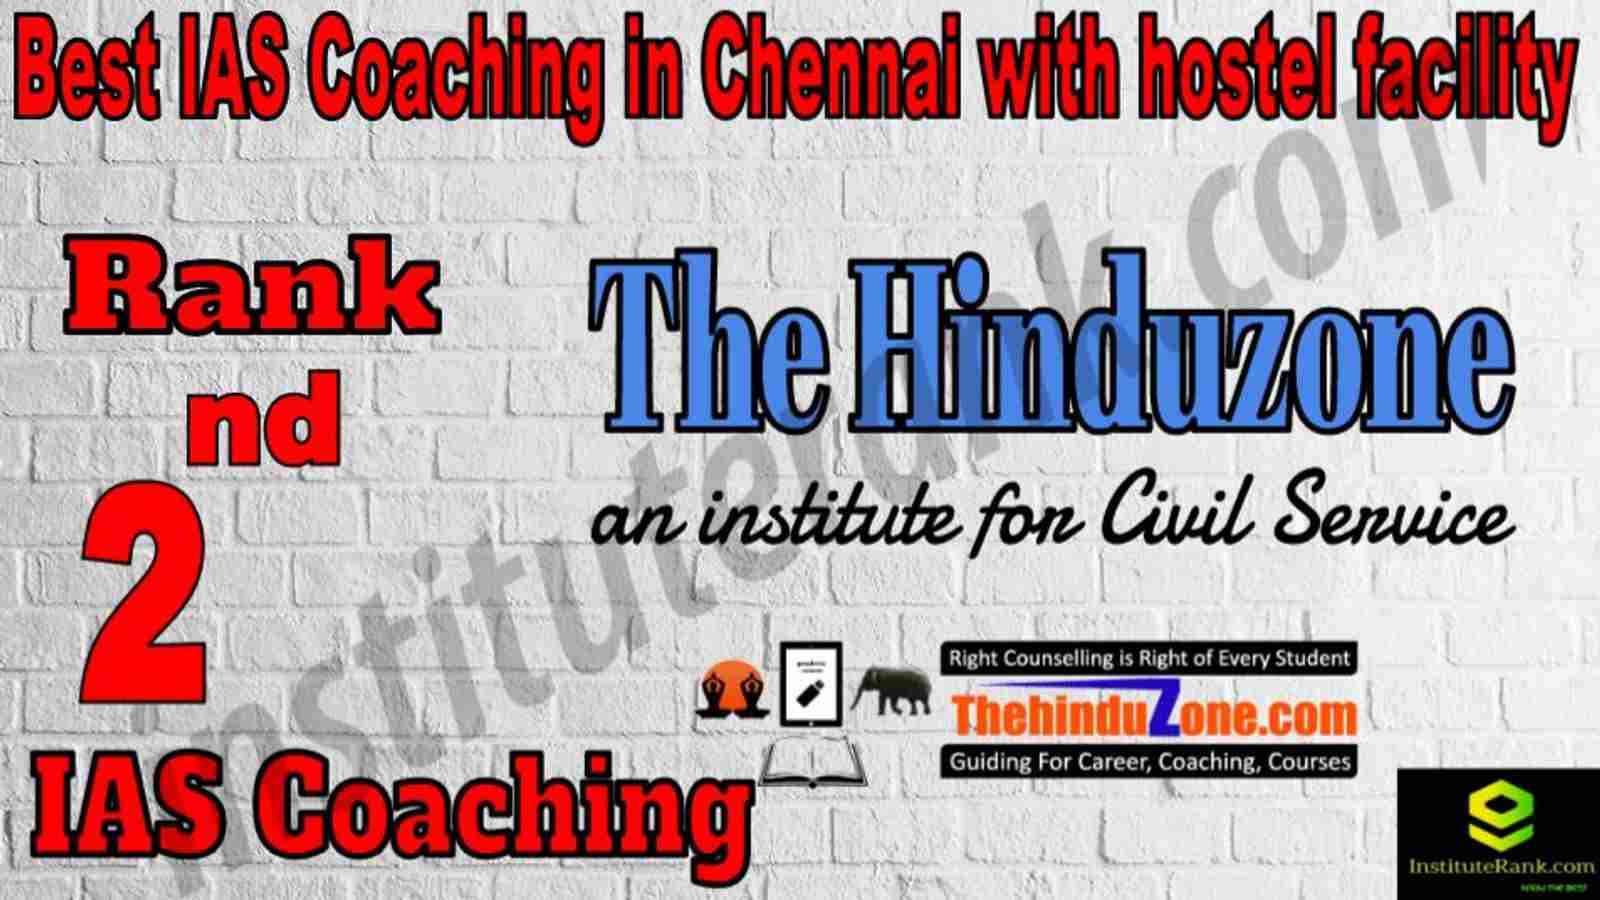 2nd Best IAS Coaching in Chennai with hostel facility